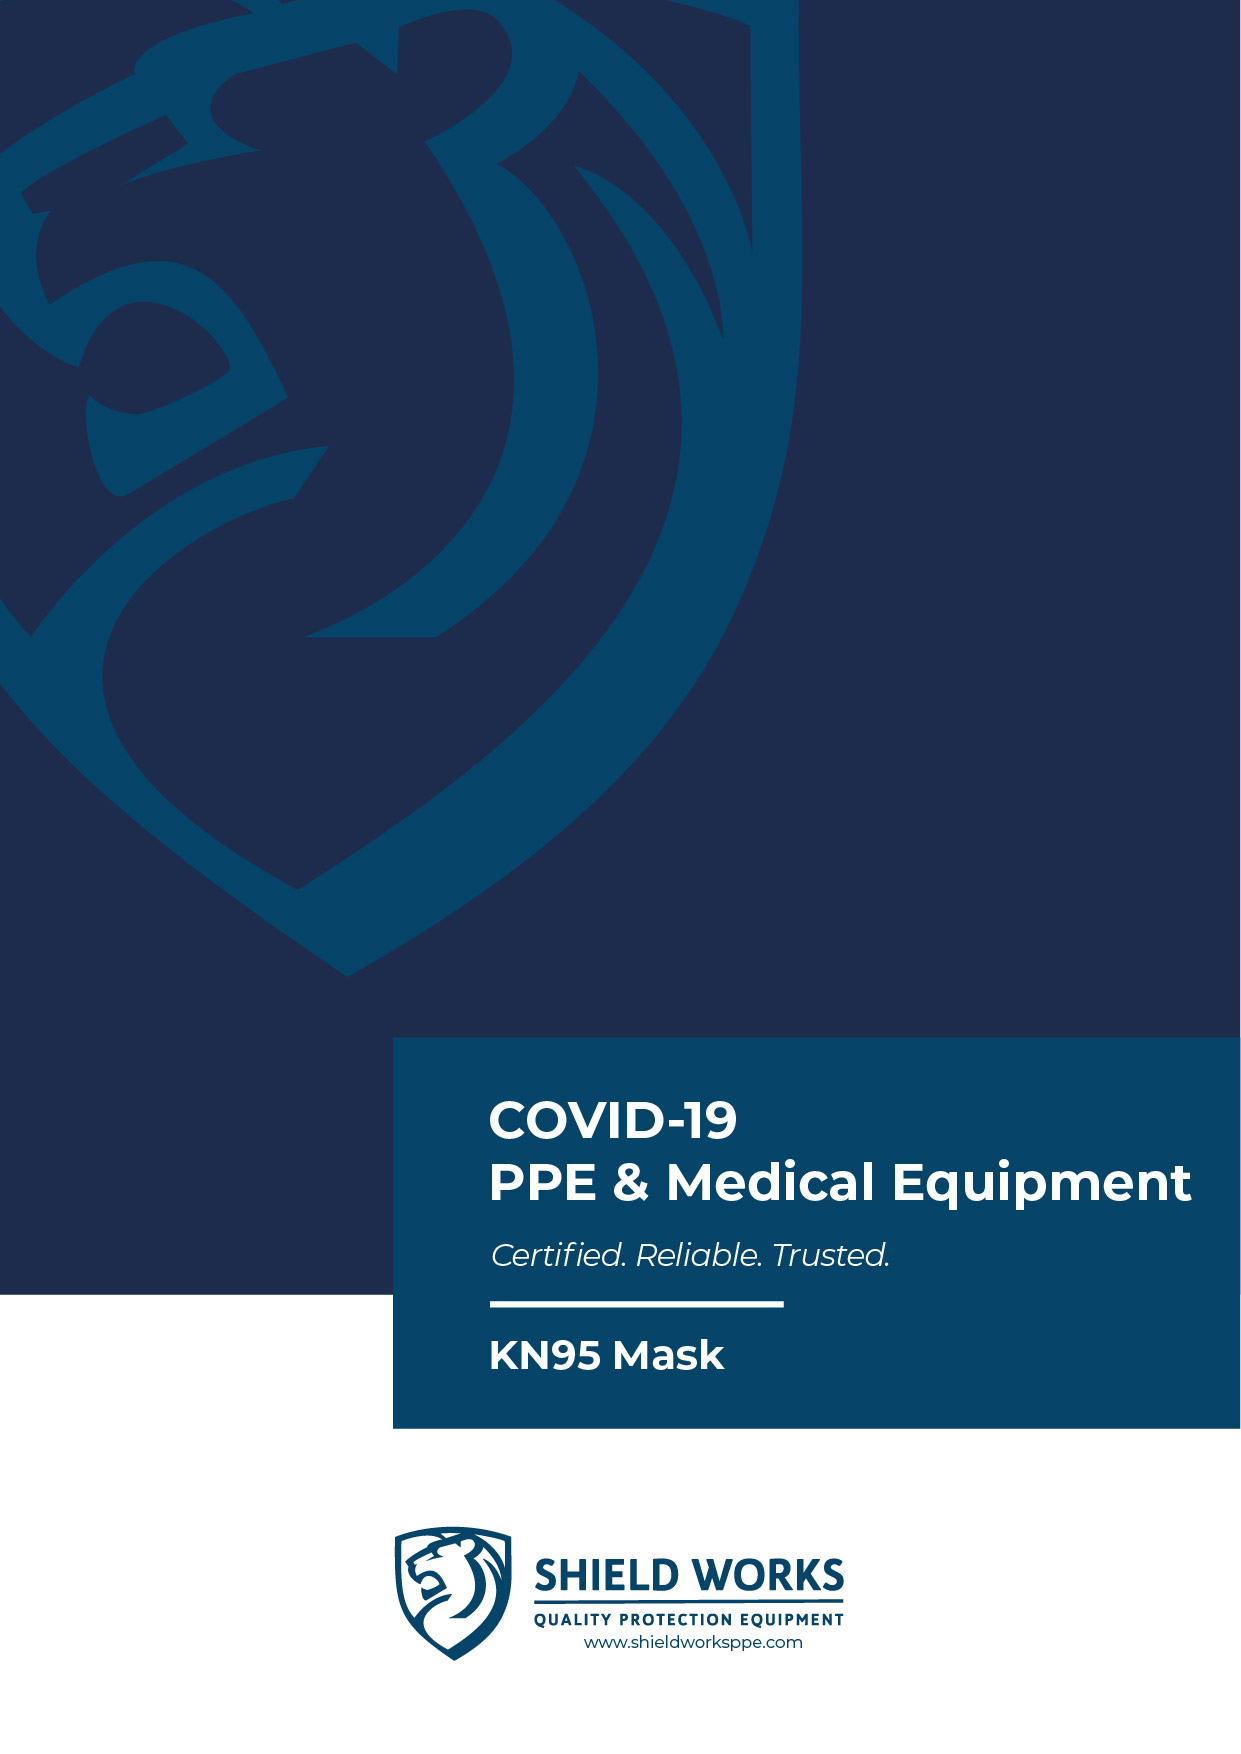 Shield Works_PPE Catalog Cover_KN95 Mask